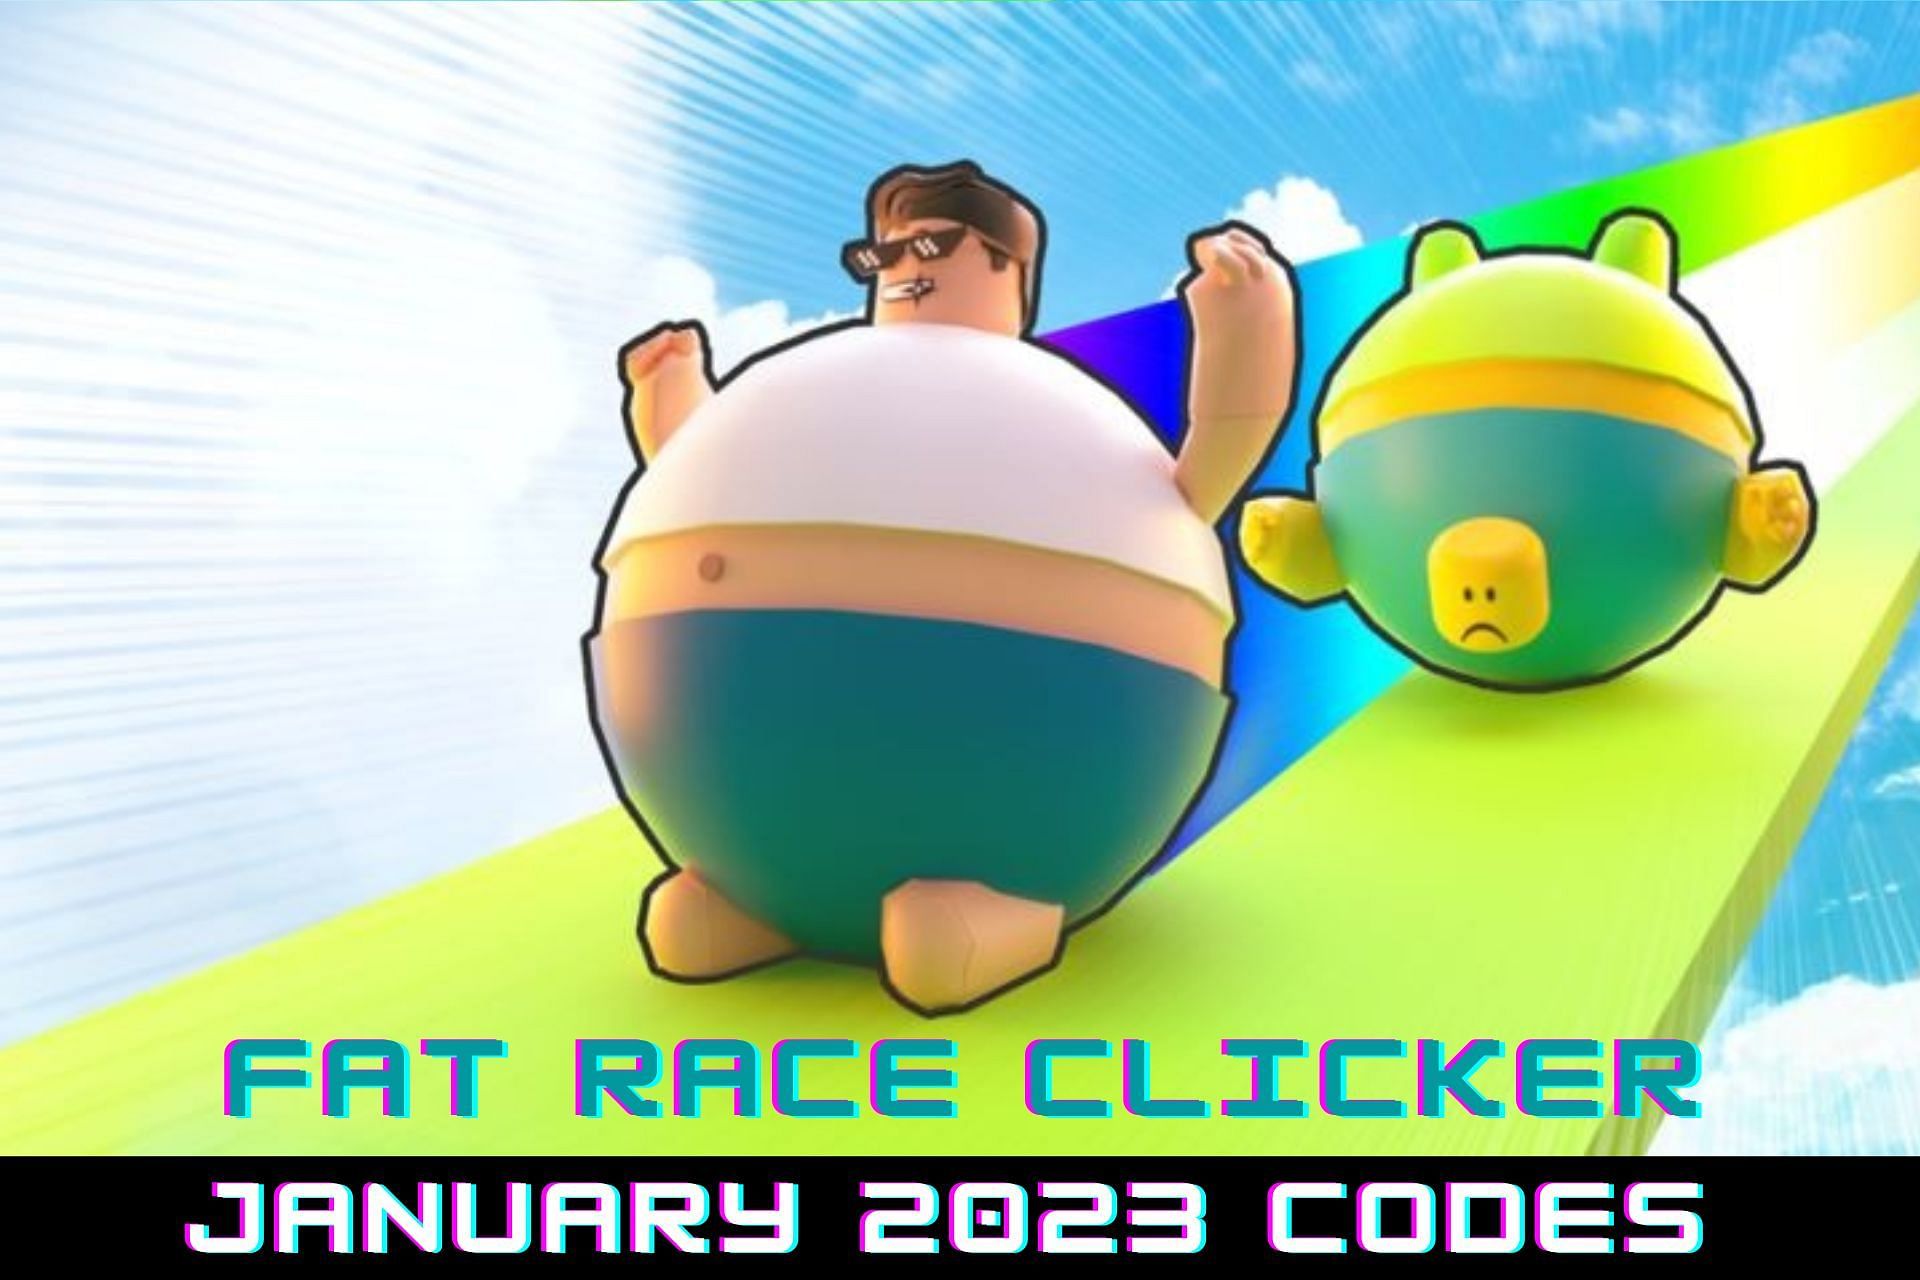 Flying Race Clicker Codes (August 2023) - Pro Game Guides